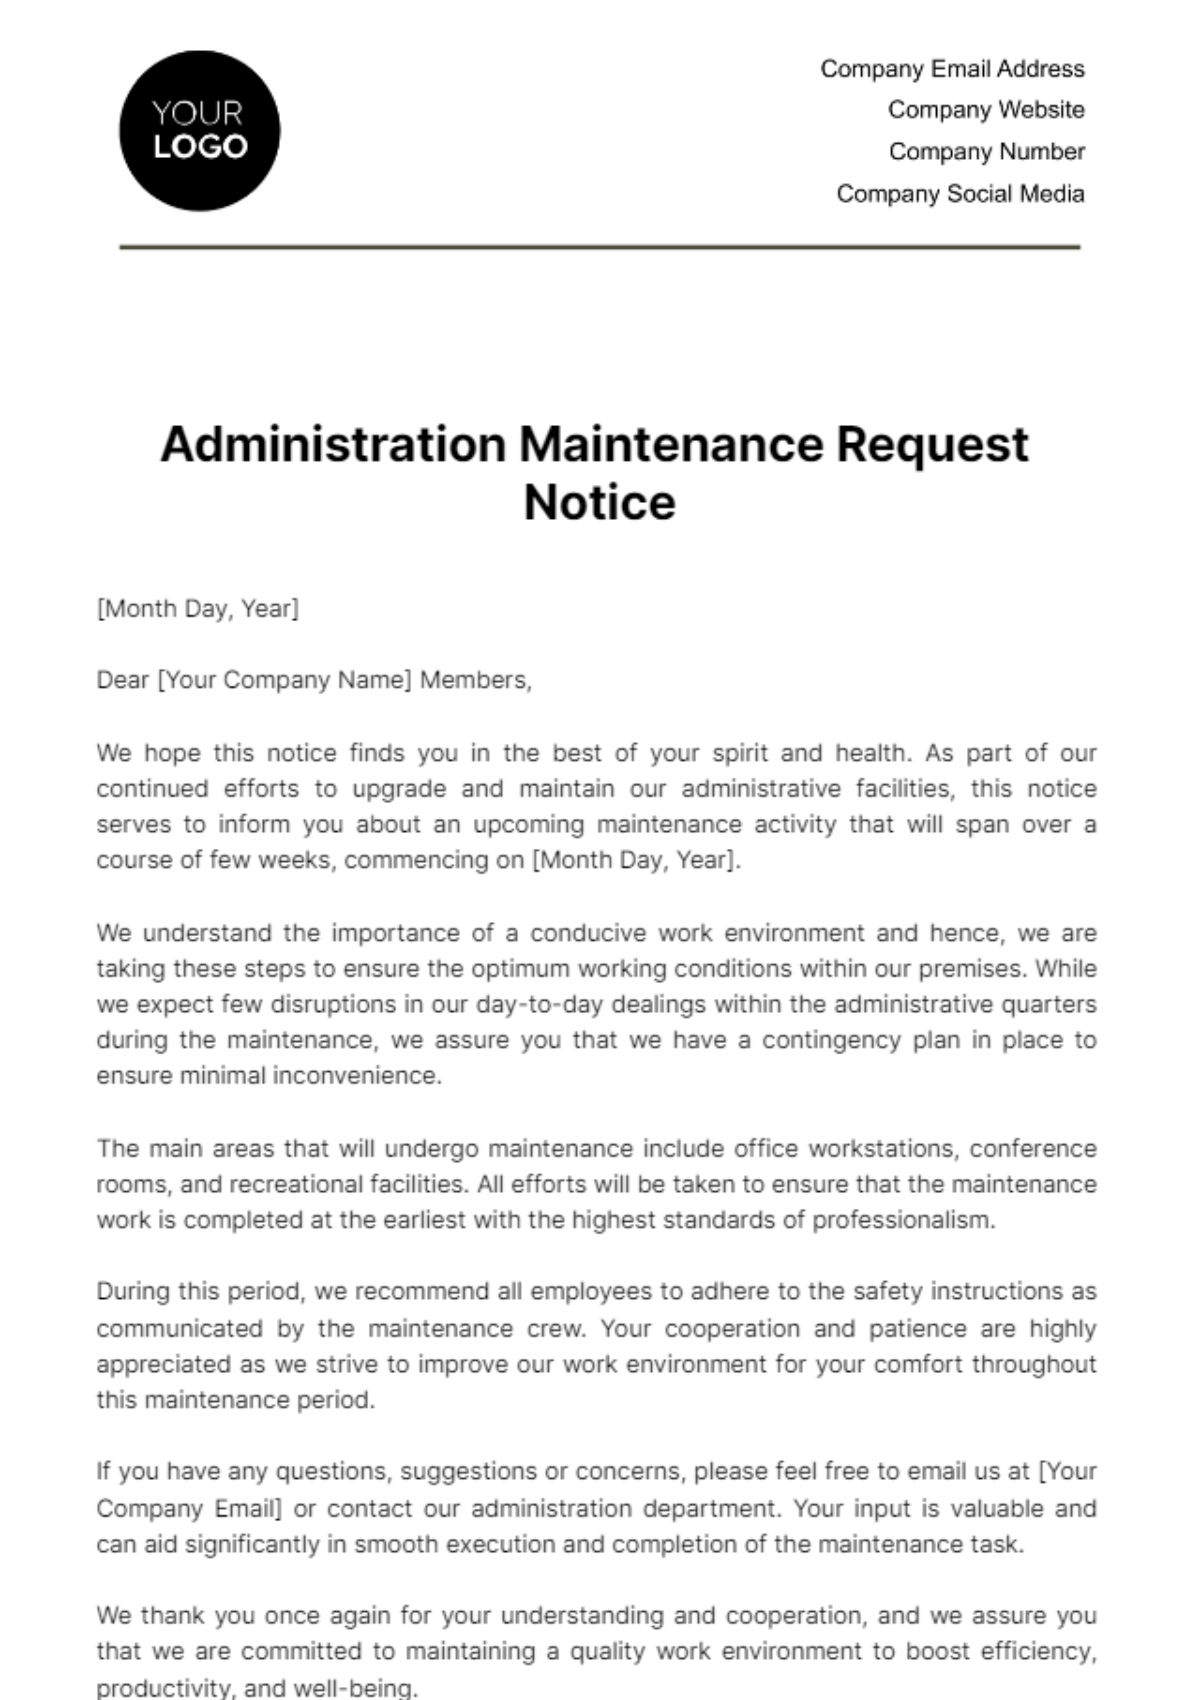 Administration Maintenance Request Notice Template